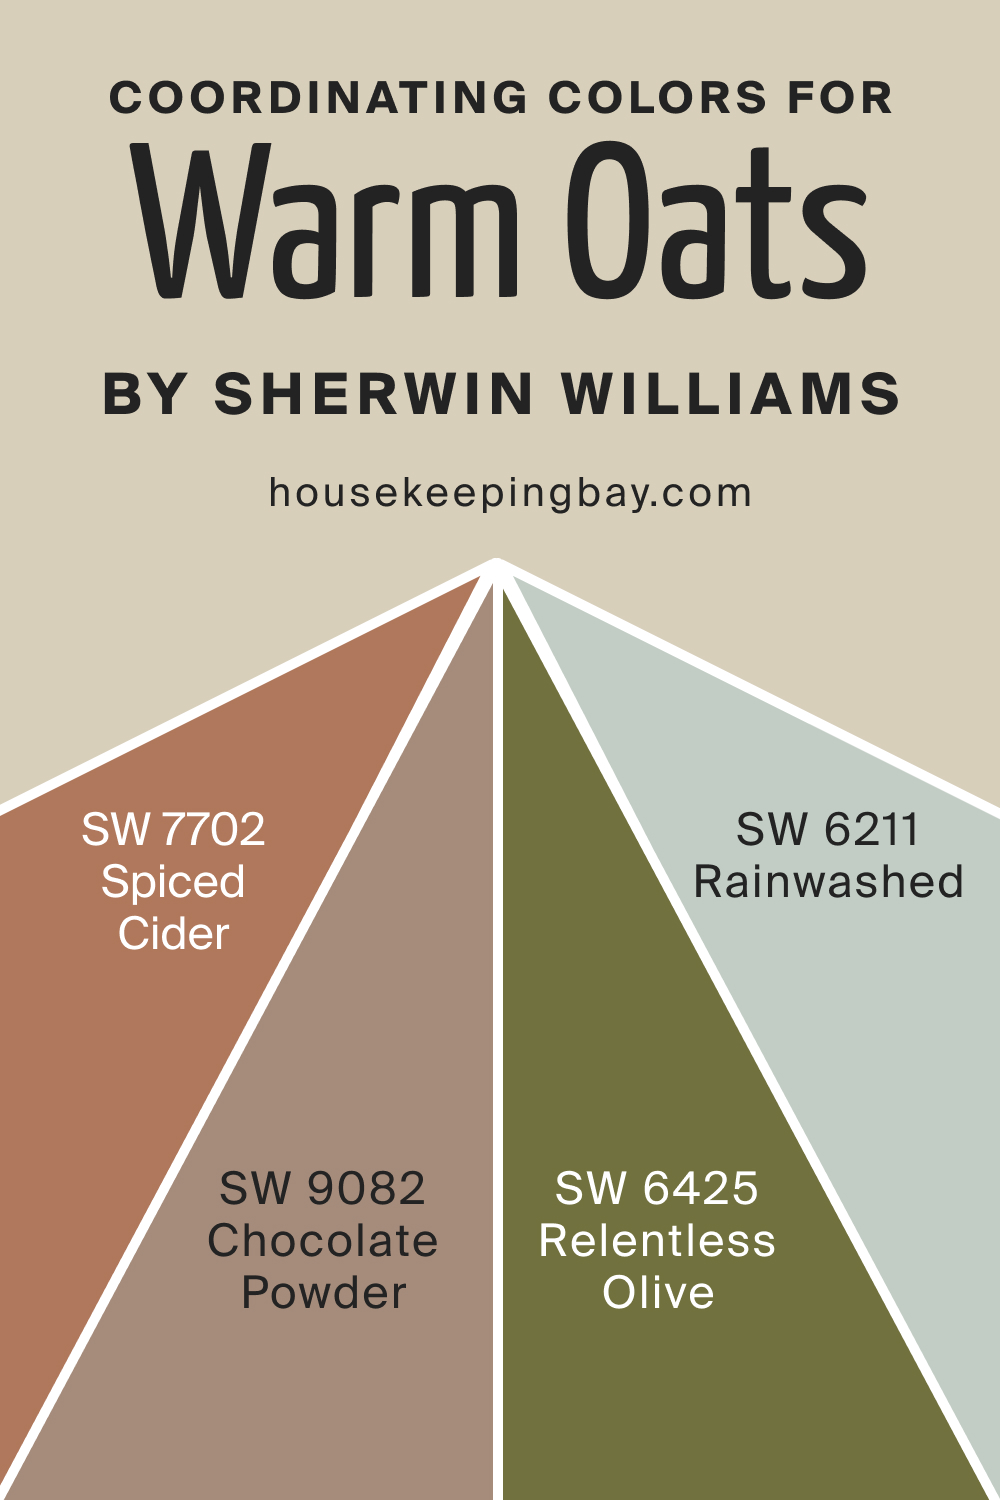 Coordinating Colors for SW 9511 Warm Oats by Sherwin Williams